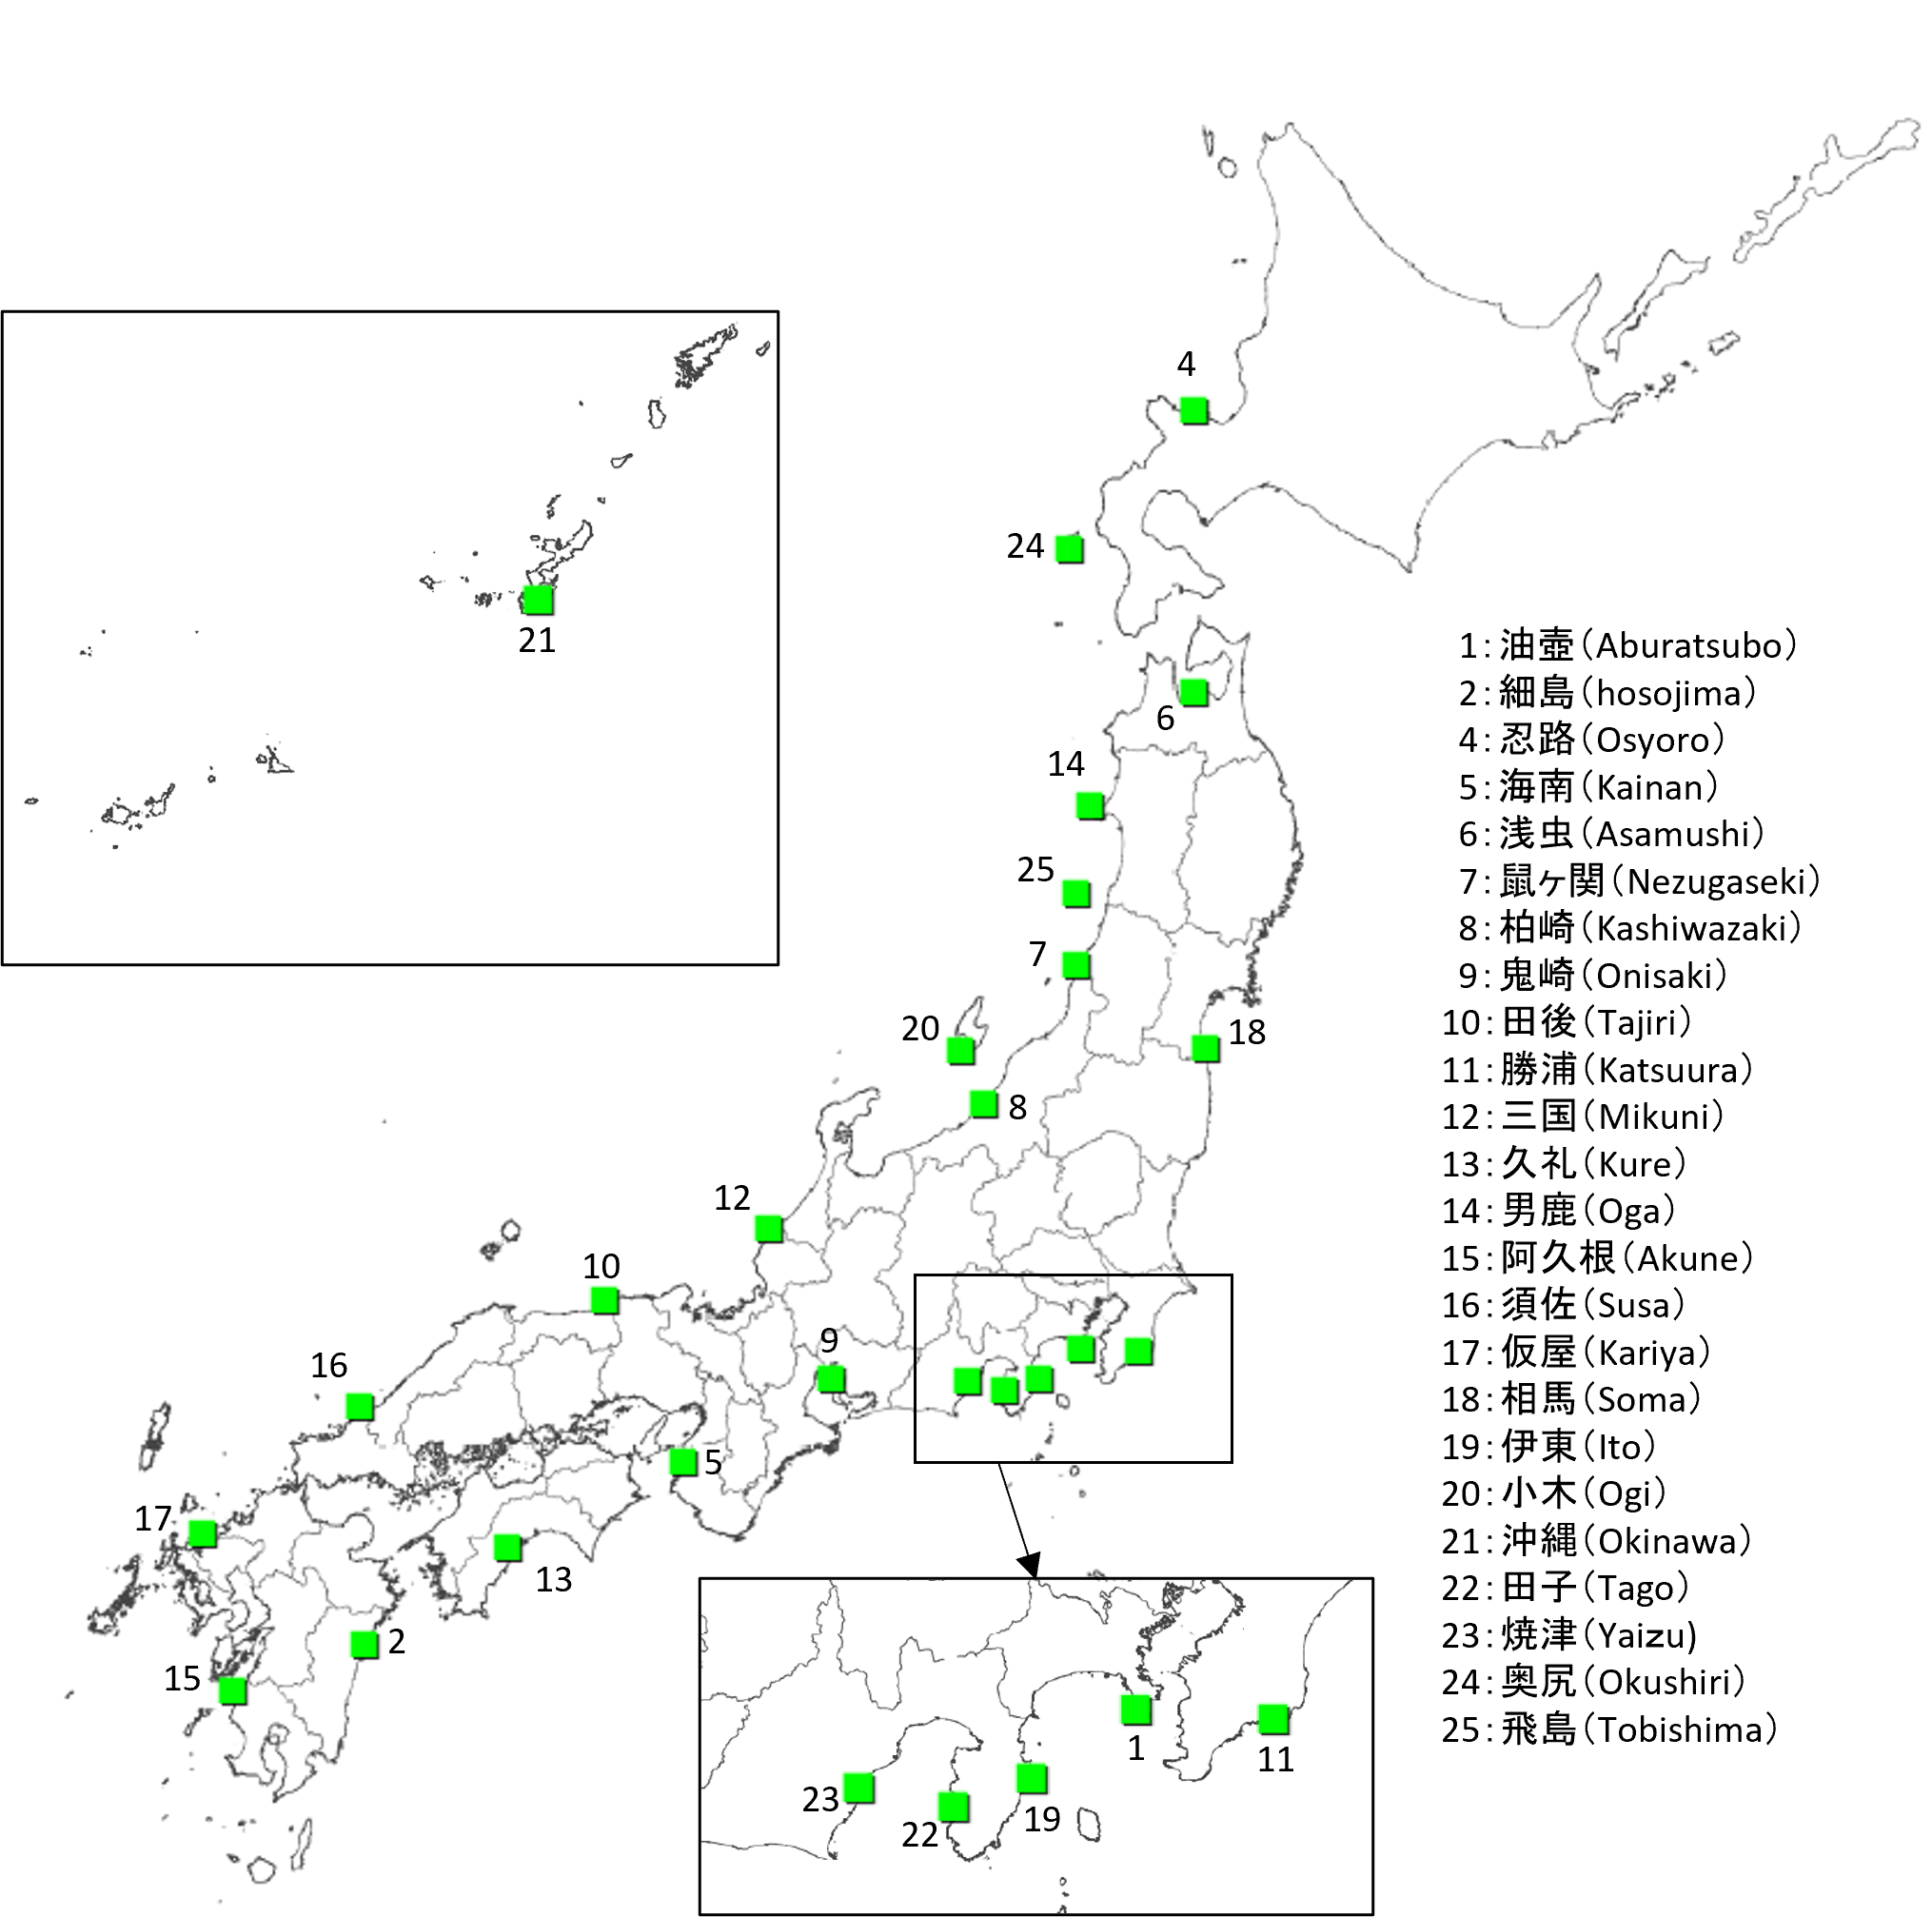 Locations of the tidal stations of the Geospatial Information Authority of Japan